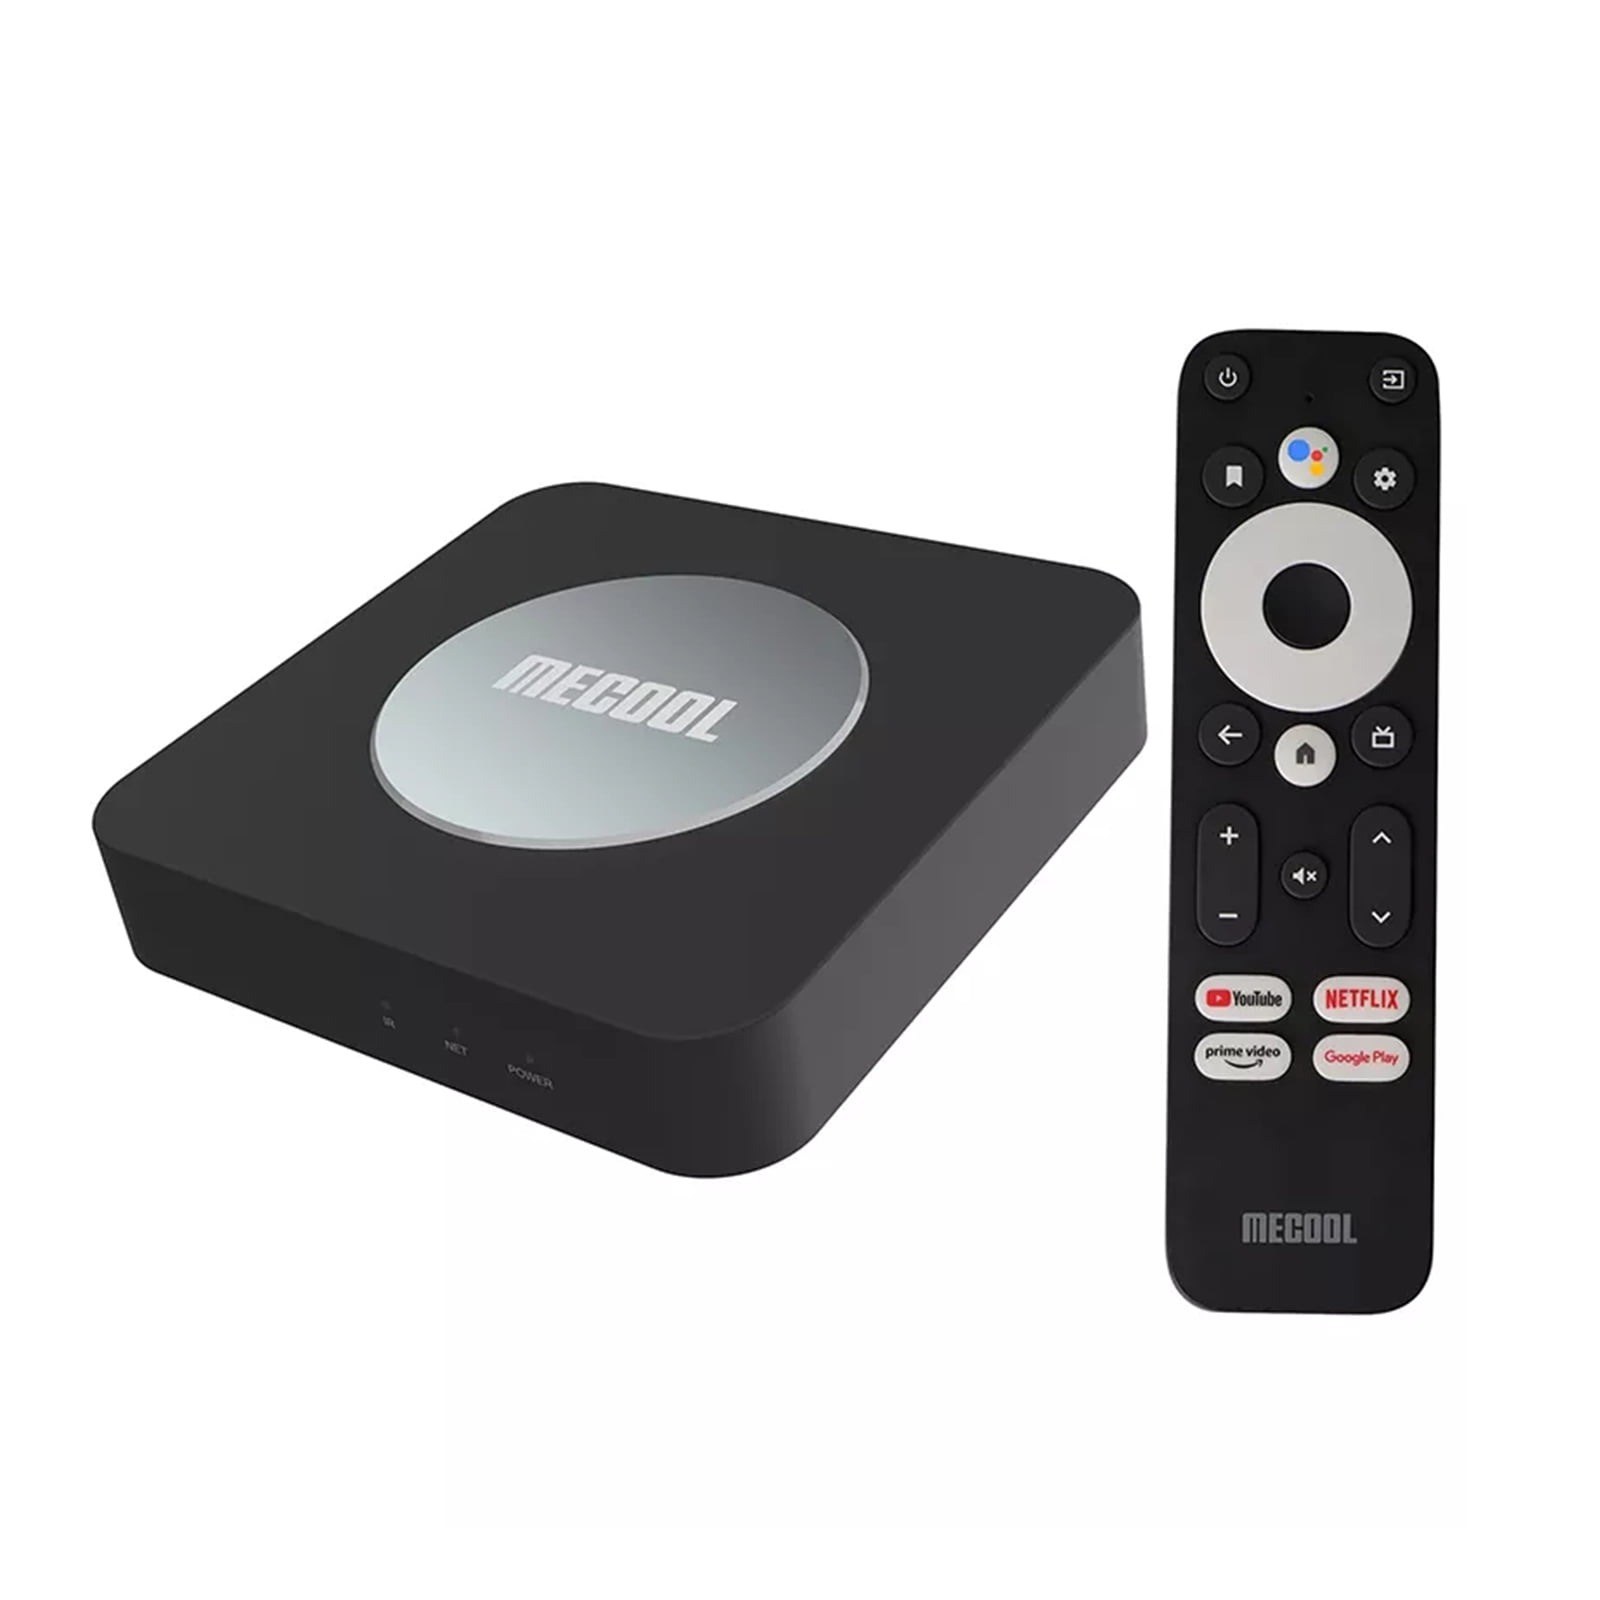 MECOOL KM2 PLUS Deluxe TV Box review - The Gadgeteer